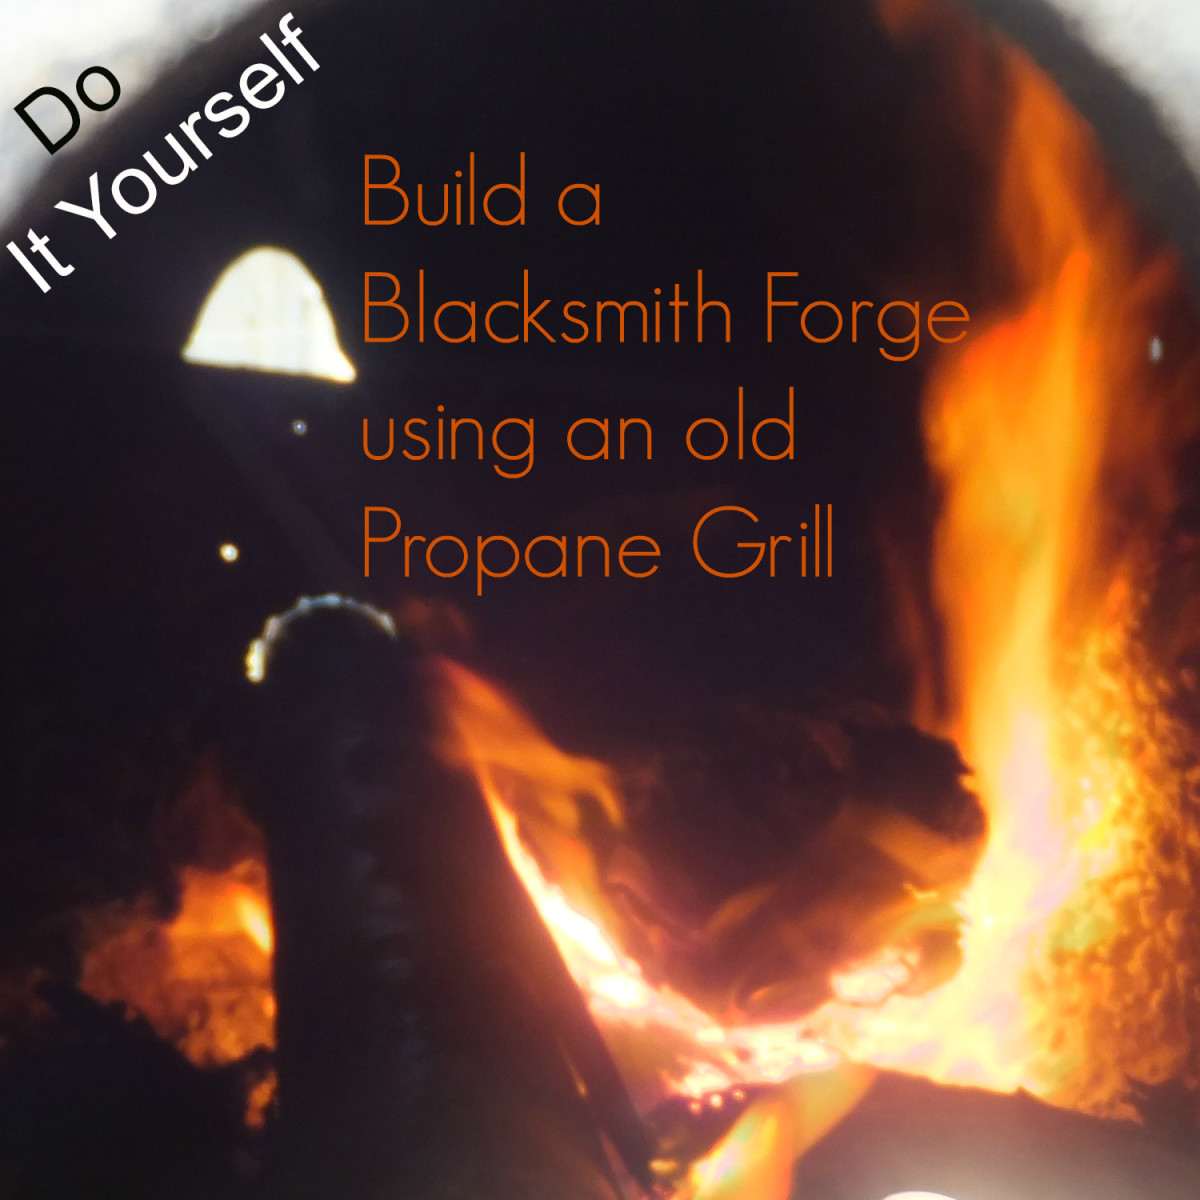 Build a Blacksmith Forge Using an old propane Grill